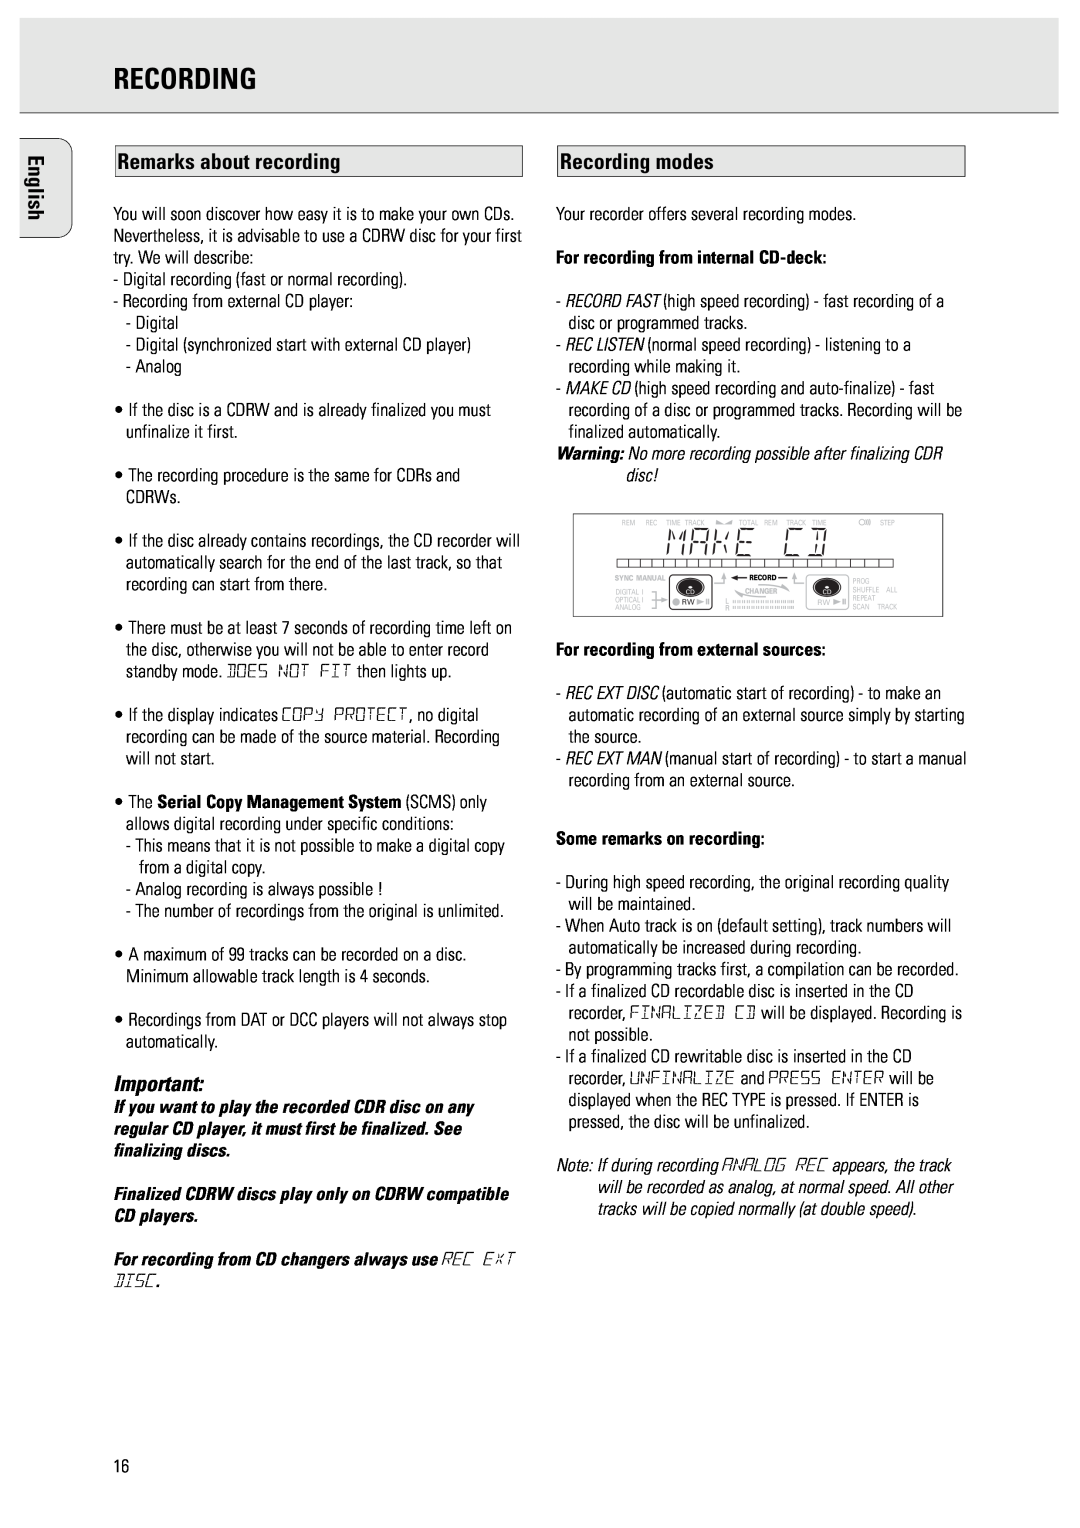 Philips CDR775 manual Remarks about recording, Recording modes, For recording from internal CD-deck 